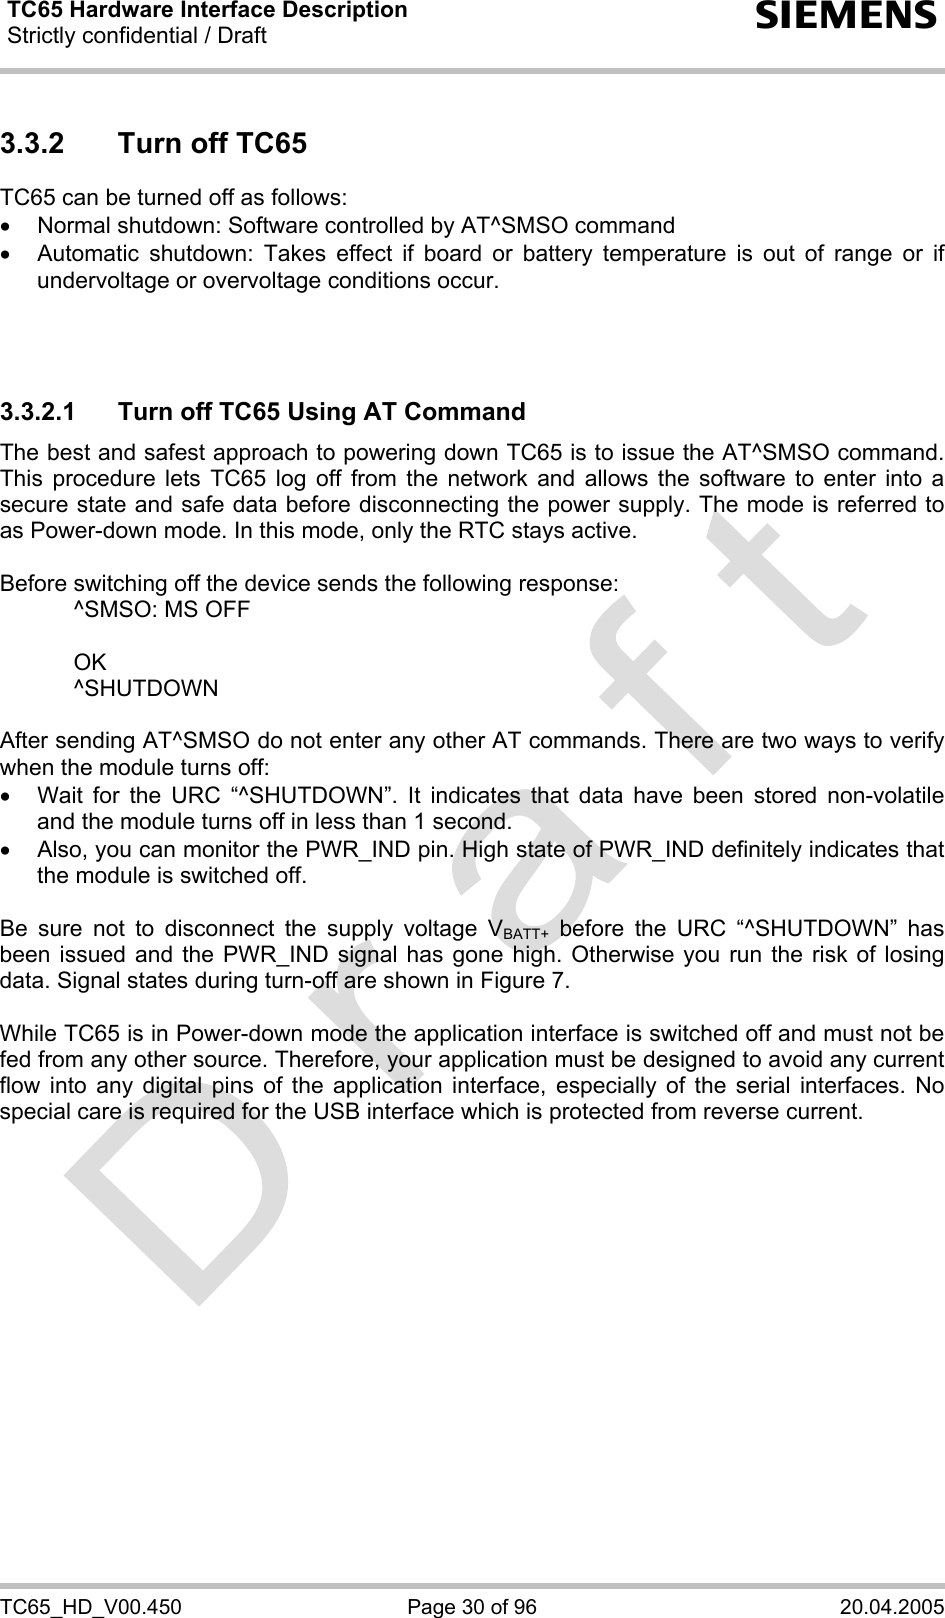 TC65 Hardware Interface Description Strictly confidential / Draft  s TC65_HD_V00.450  Page 30 of 96  20.04.2005 3.3.2  Turn off TC65 TC65 can be turned off as follows: •  Normal shutdown: Software controlled by AT^SMSO command •  Automatic shutdown: Takes effect if board or battery temperature is out of range or if undervoltage or overvoltage conditions occur.    3.3.2.1  Turn off TC65 Using AT Command The best and safest approach to powering down TC65 is to issue the AT^SMSO command. This procedure lets TC65 log off from the network and allows the software to enter into a secure state and safe data before disconnecting the power supply. The mode is referred to as Power-down mode. In this mode, only the RTC stays active.  Before switching off the device sends the following response:     ^SMSO: MS OFF    OK   ^SHUTDOWN  After sending AT^SMSO do not enter any other AT commands. There are two ways to verify when the module turns off:  •  Wait for the URC “^SHUTDOWN”. It indicates that data have been stored non-volatile and the module turns off in less than 1 second. •  Also, you can monitor the PWR_IND pin. High state of PWR_IND definitely indicates that the module is switched off.  Be sure not to disconnect the supply voltage VBATT+ before the URC “^SHUTDOWN” has been issued and the PWR_IND signal has gone high. Otherwise you run the risk of losing data. Signal states during turn-off are shown in Figure 7.  While TC65 is in Power-down mode the application interface is switched off and must not be fed from any other source. Therefore, your application must be designed to avoid any current flow into any digital pins of the application interface, especially of the serial interfaces. No special care is required for the USB interface which is protected from reverse current.   